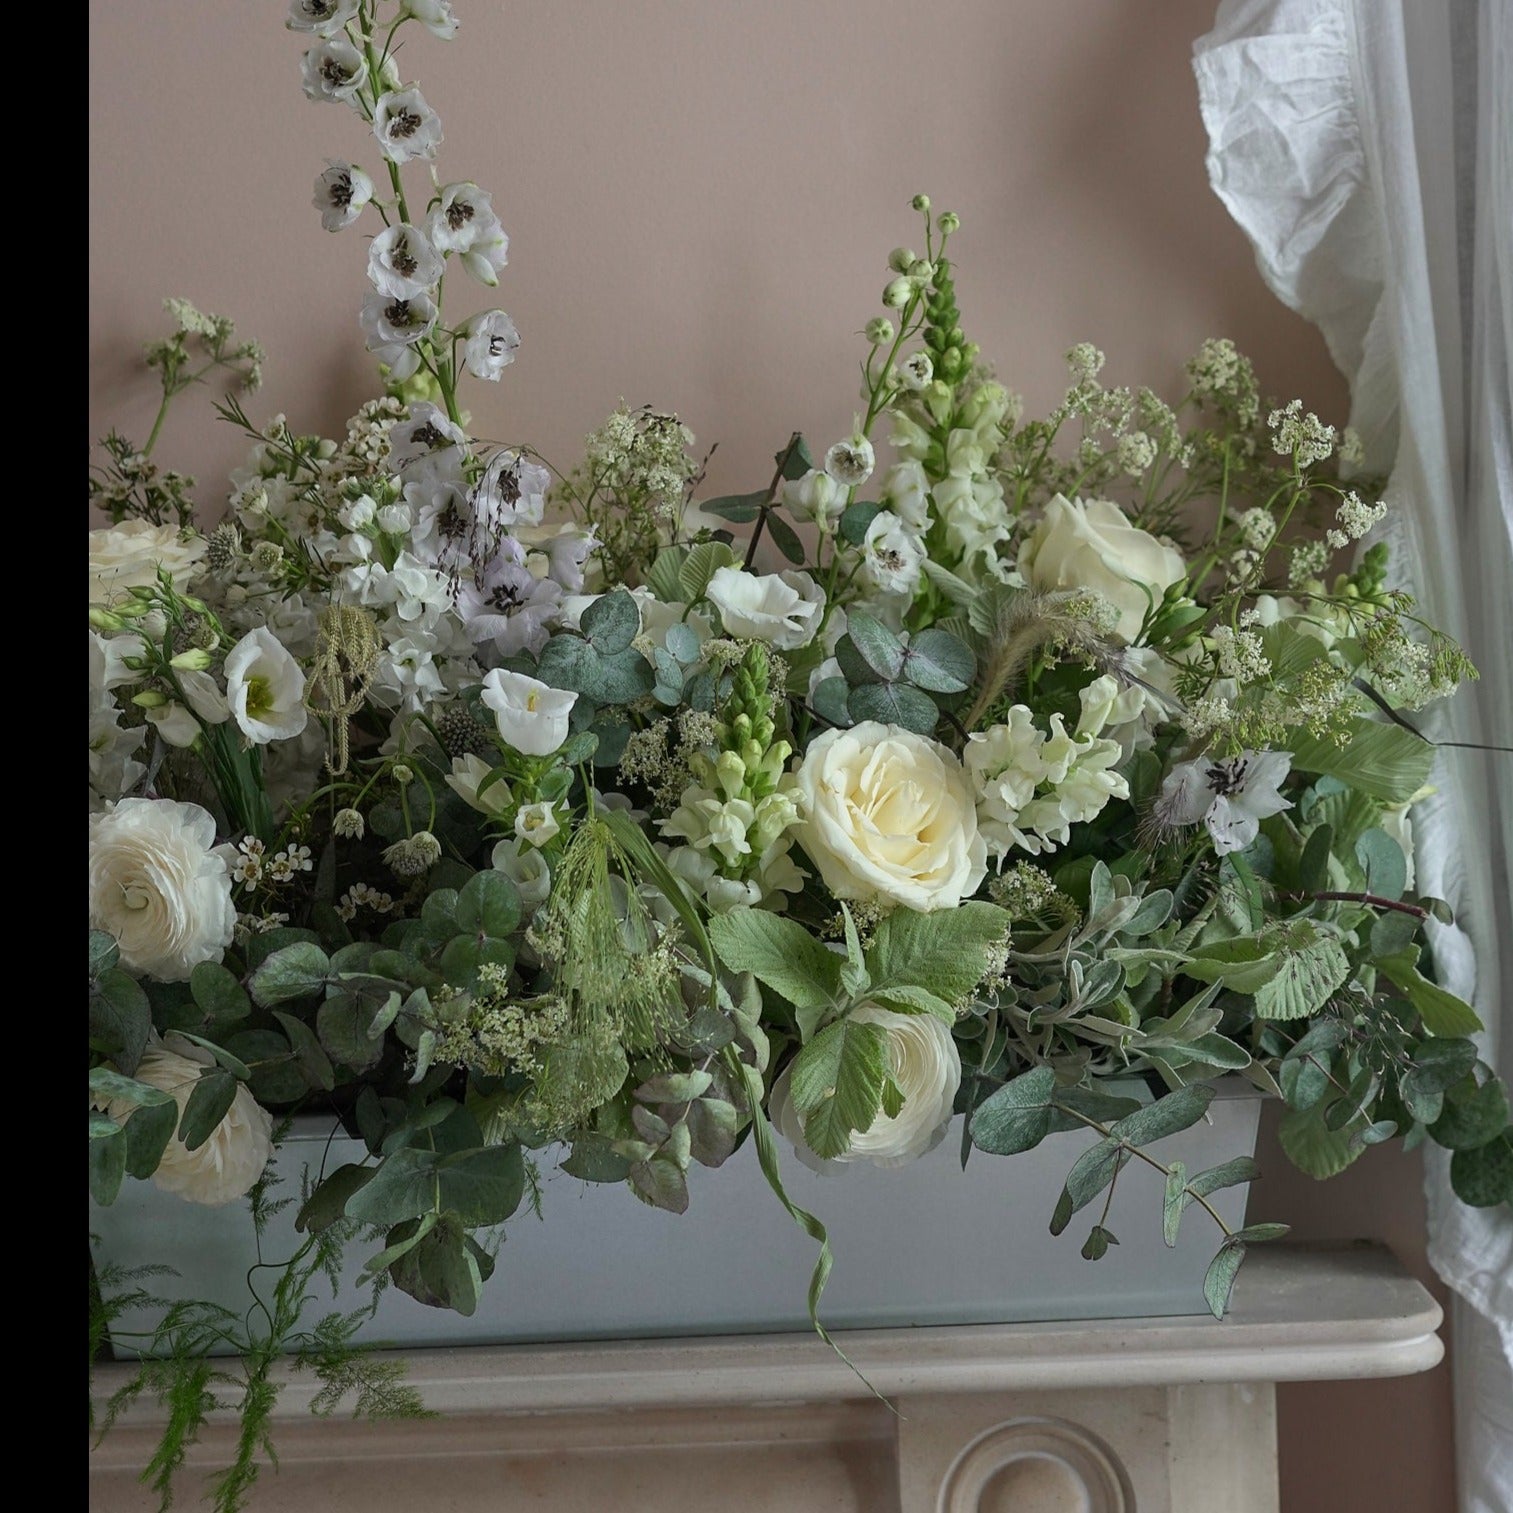 classic white and green foliage trough arrangement to decorate wedding venues and mantlepieces